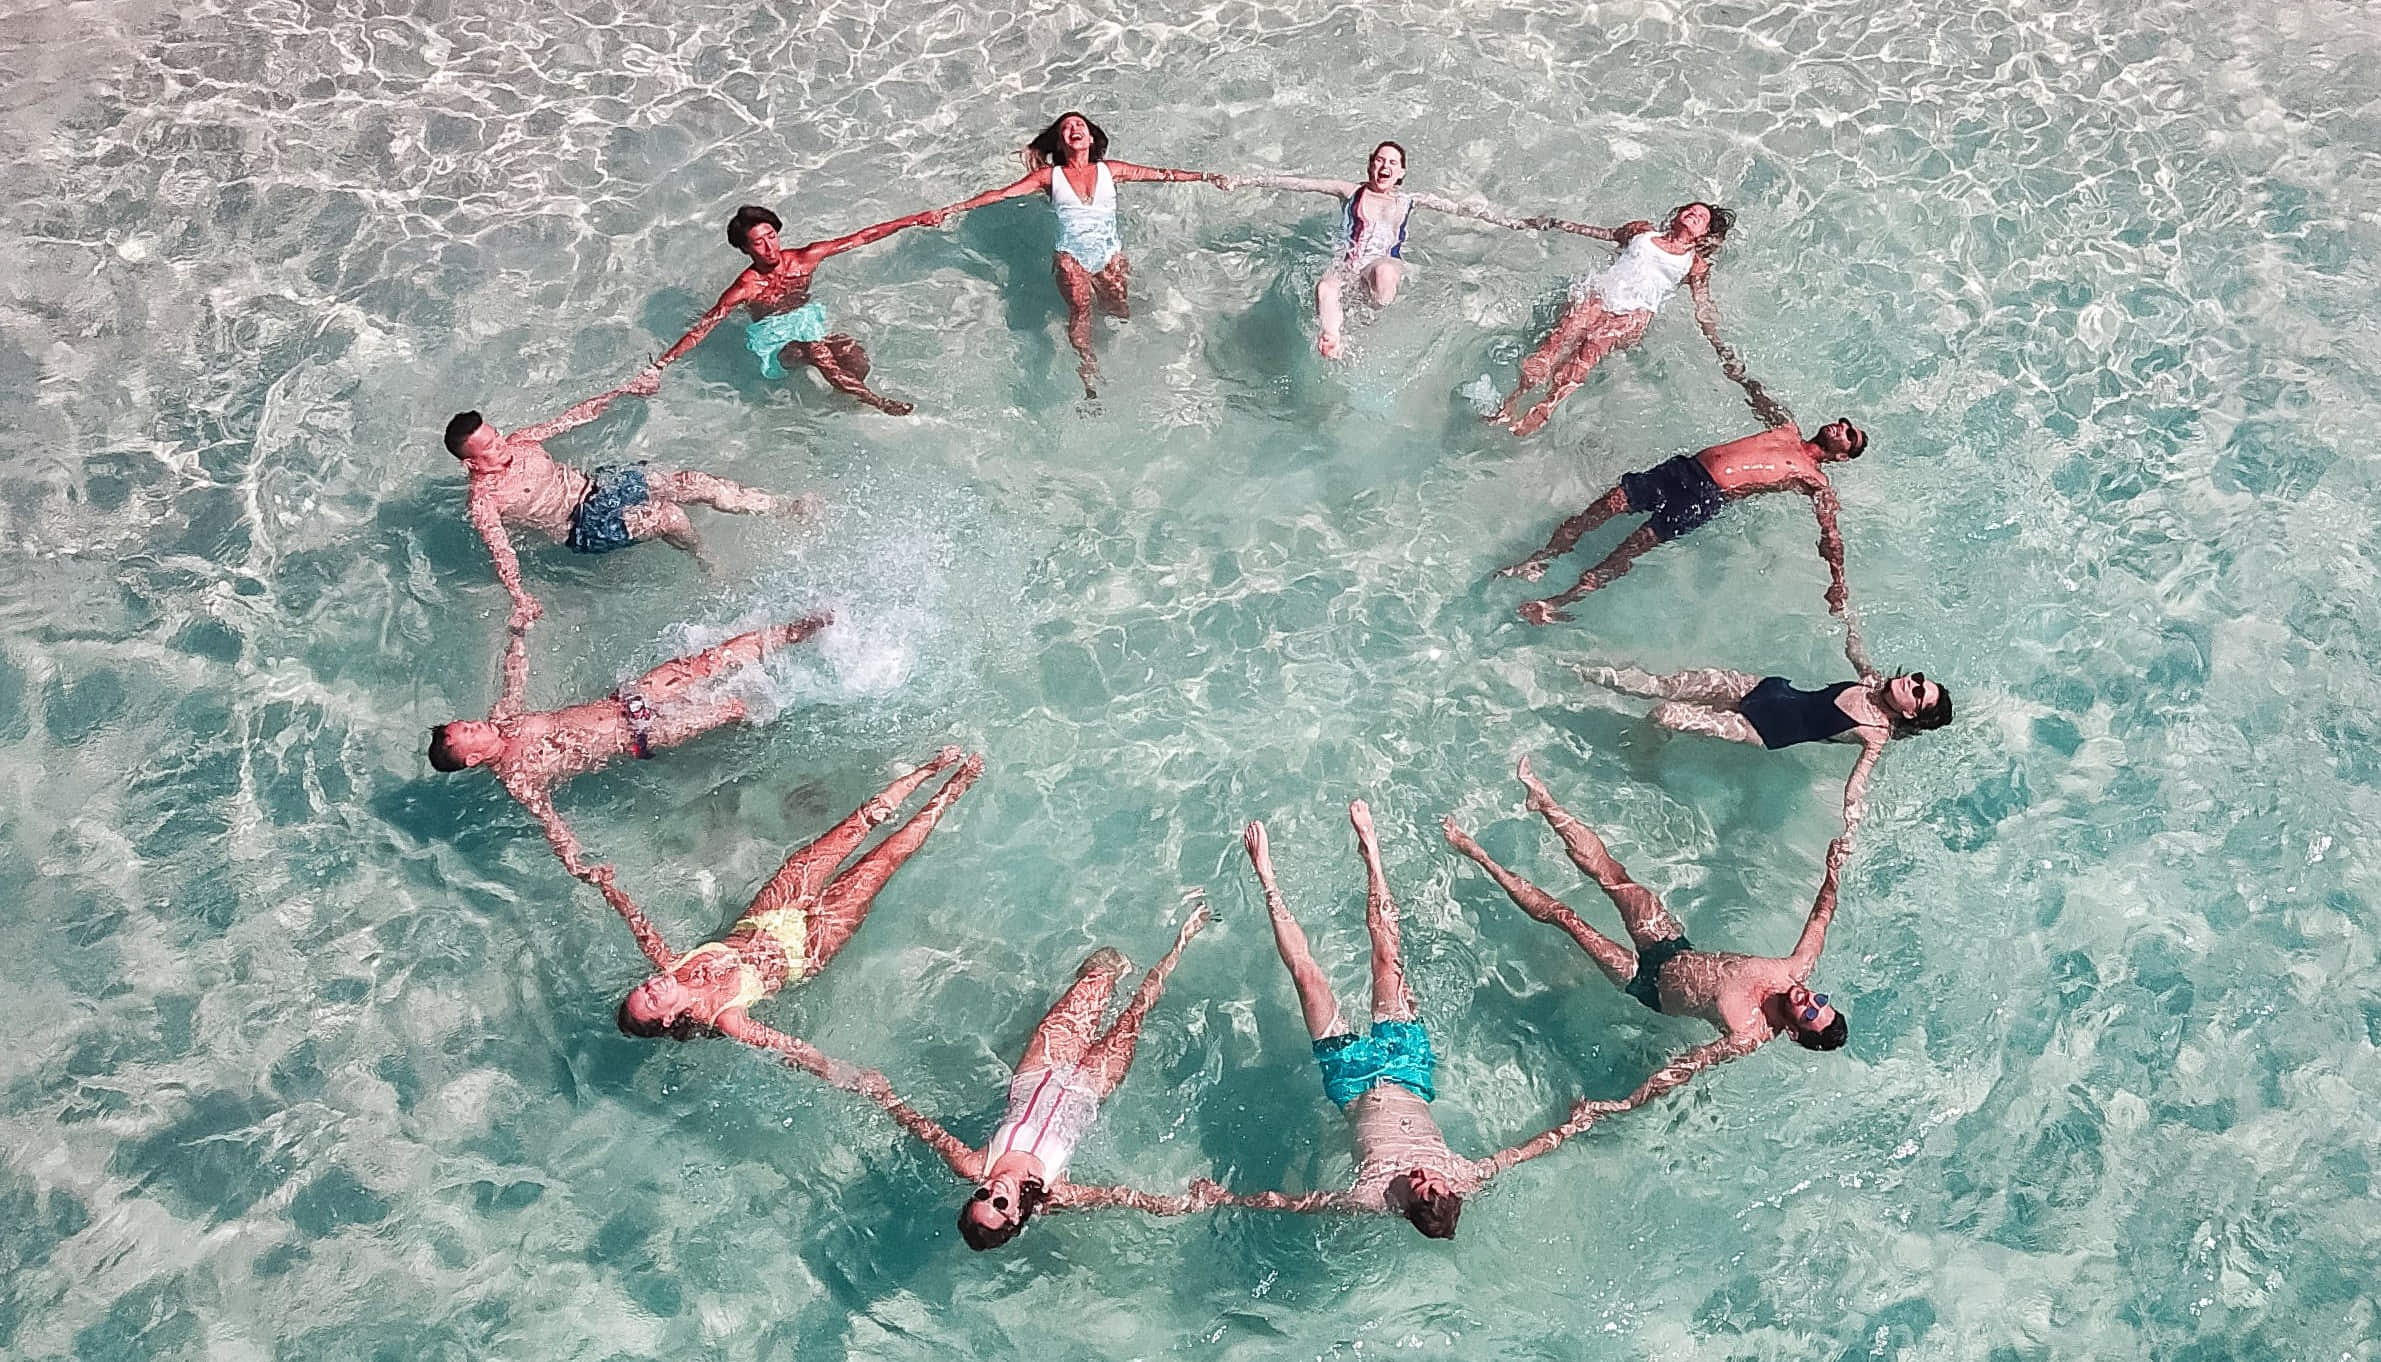 group holding hands and forming a circle in the water